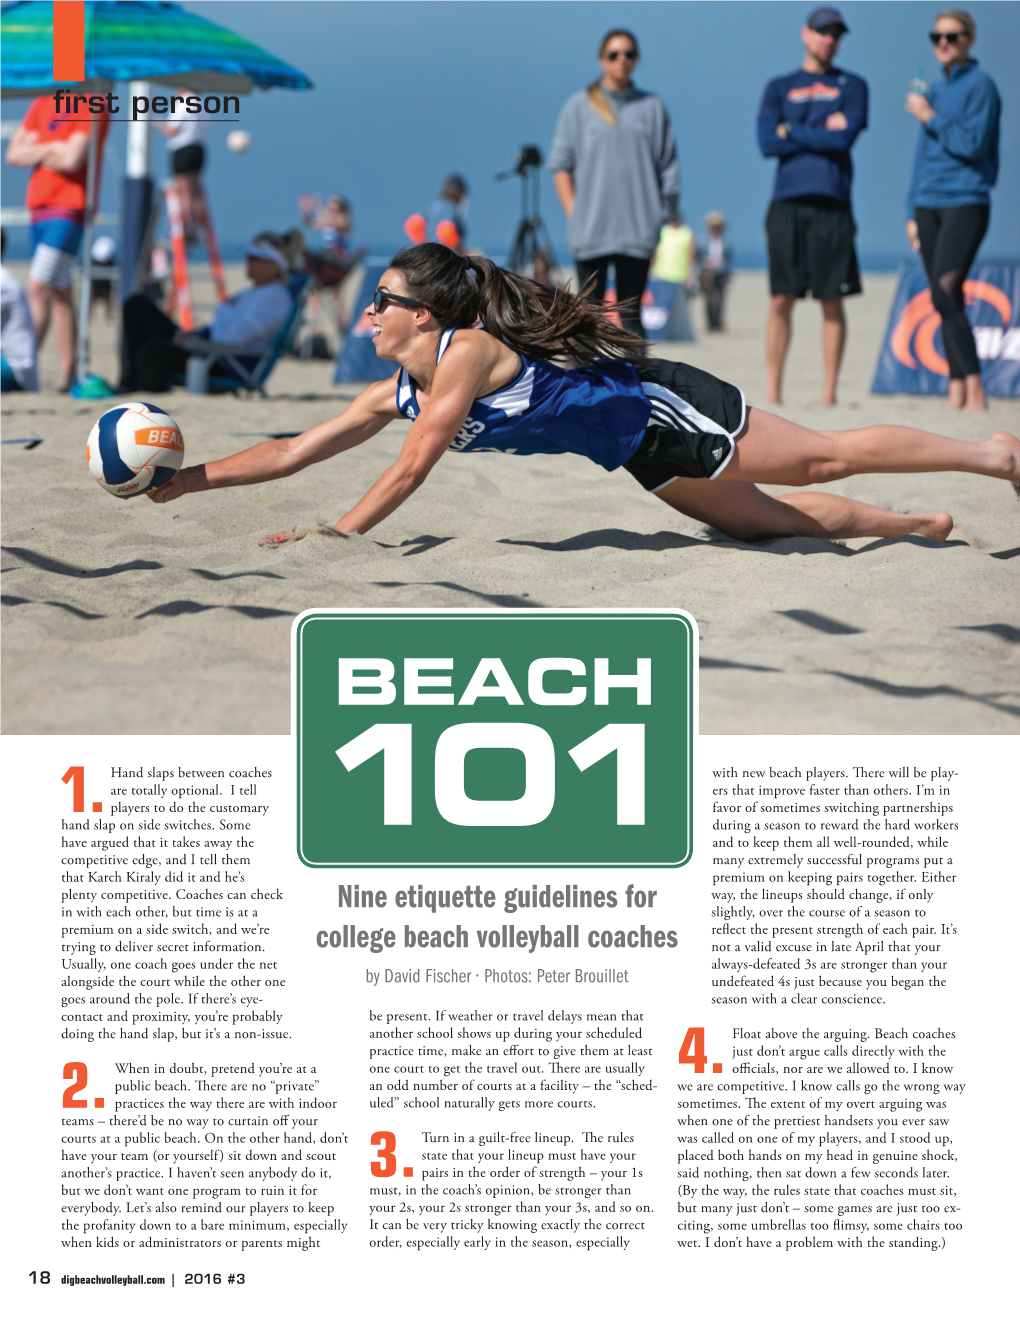 Nine Etiquette Guidelines for College Beach Volleyball Coaches